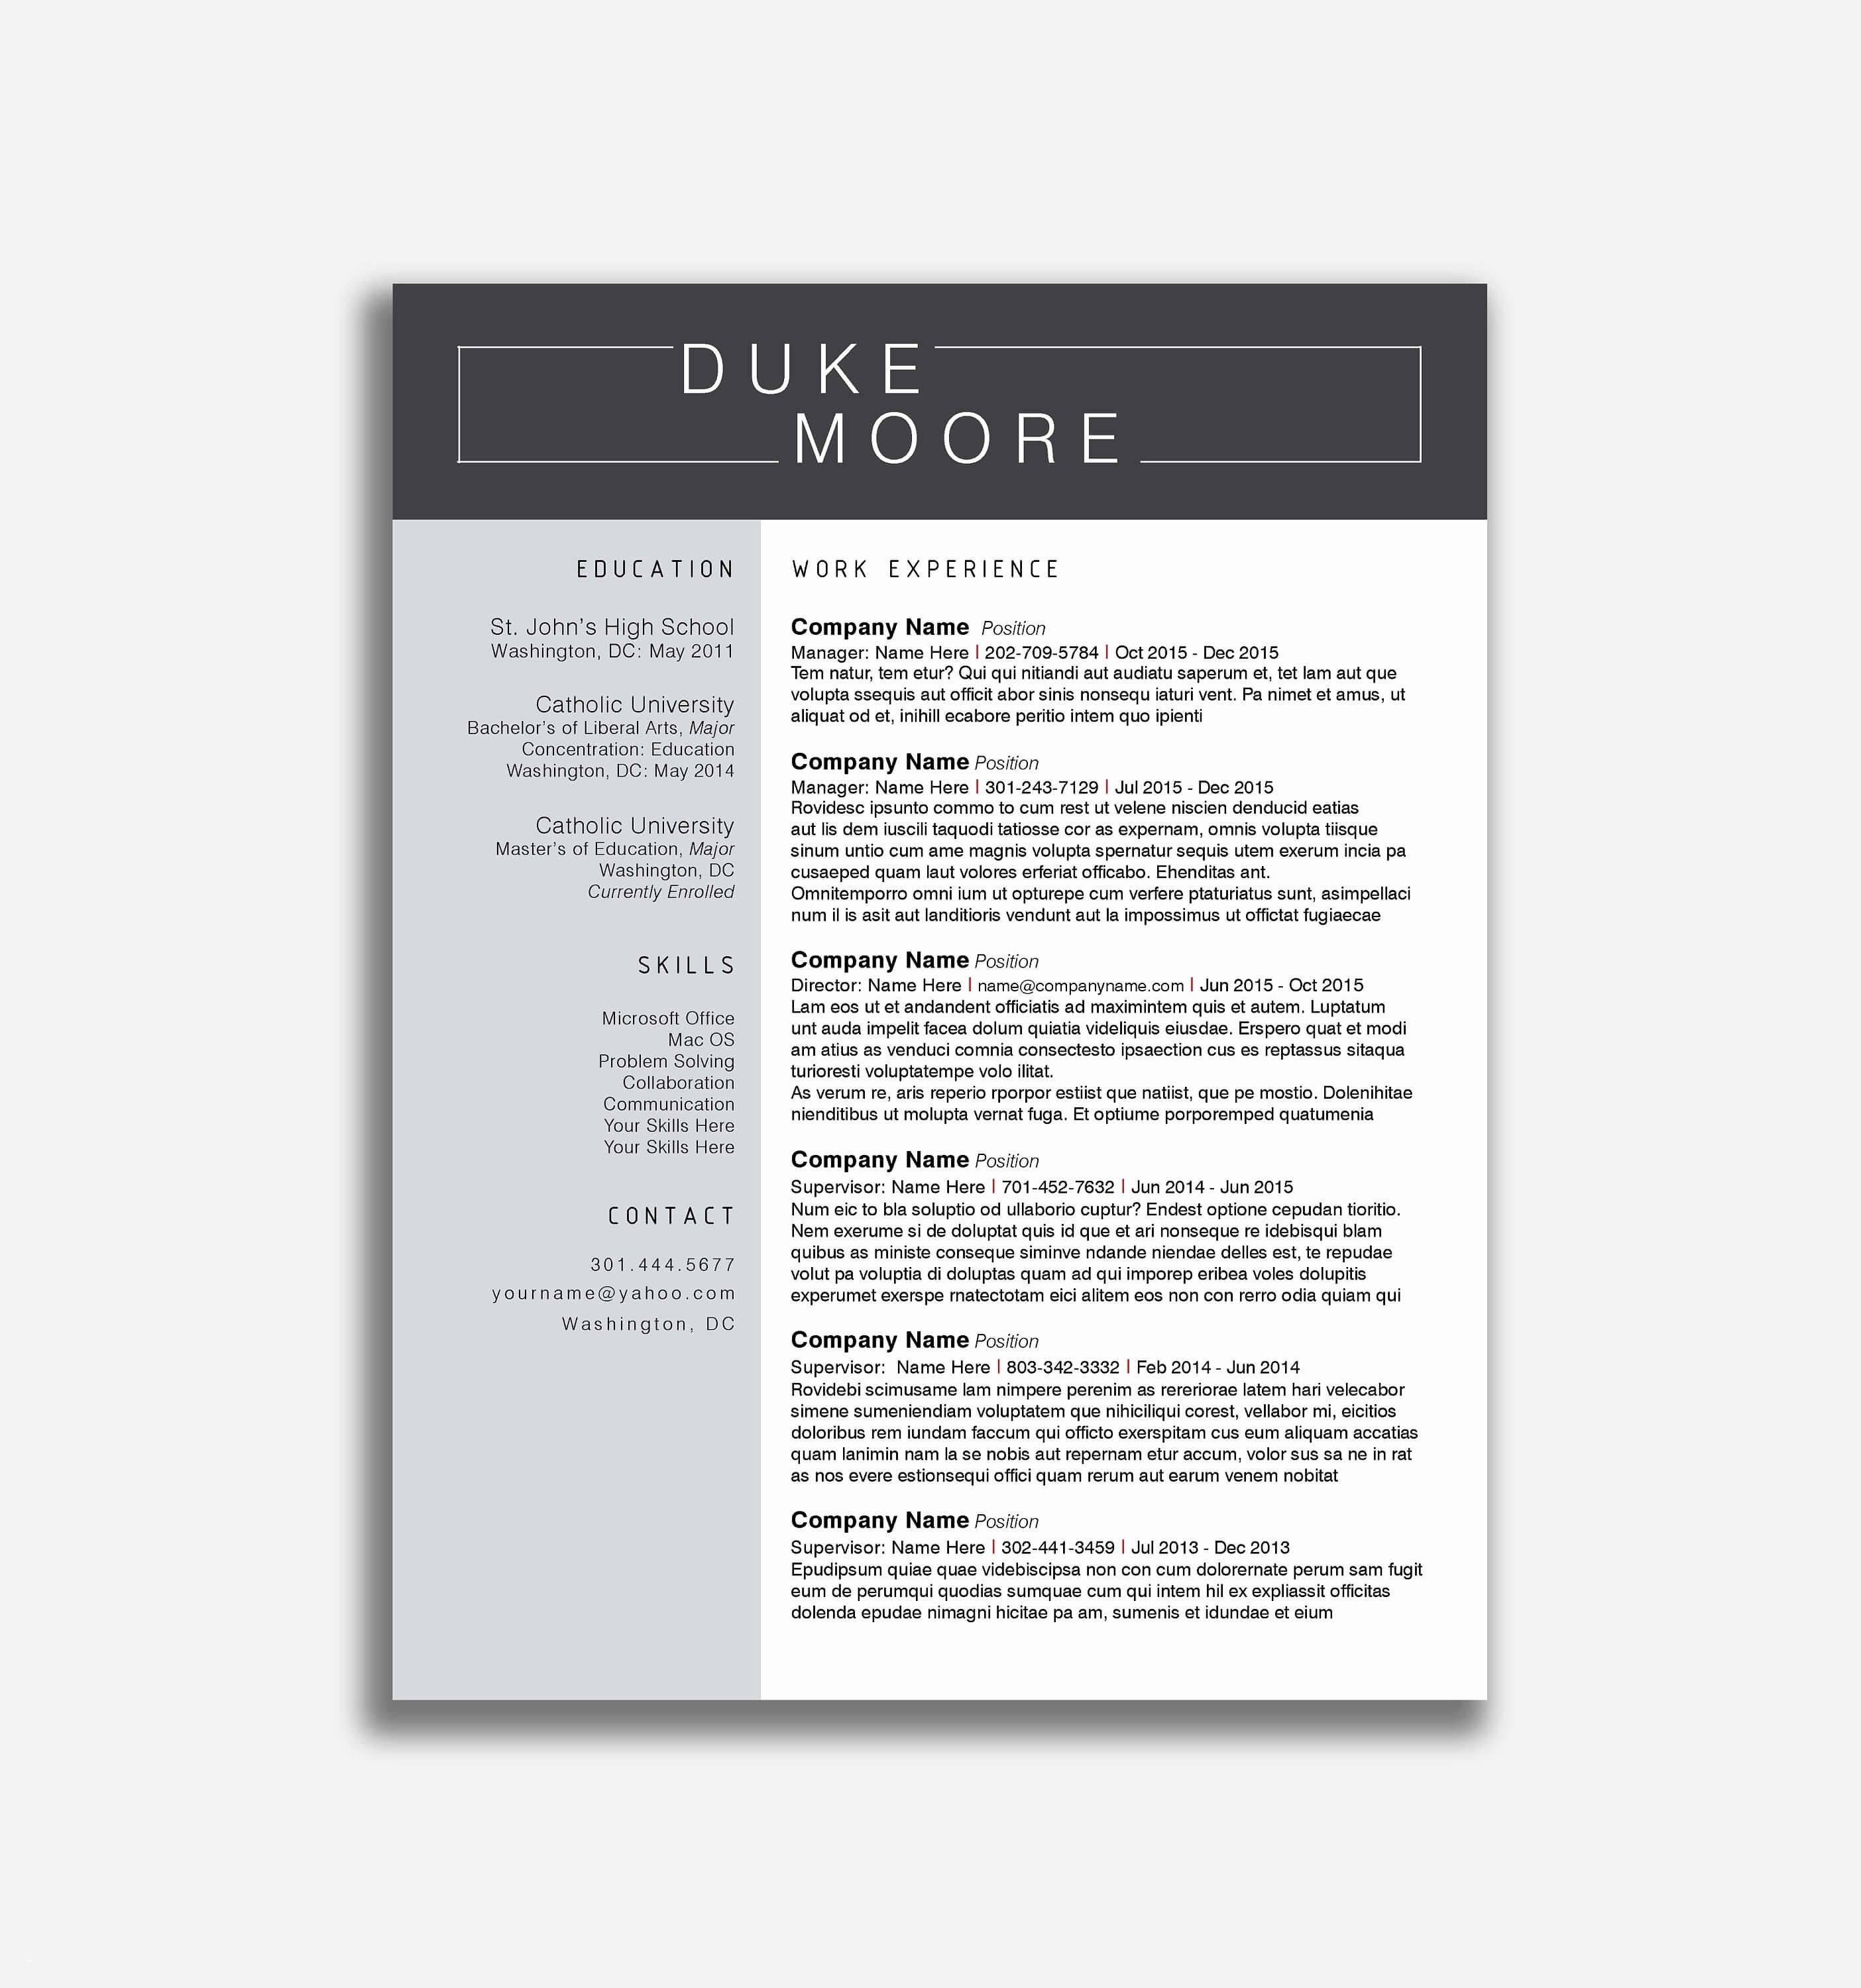 Resume Templates For Word 2010 Beautiful Free How To Use For How To Use Templates In Word 2010